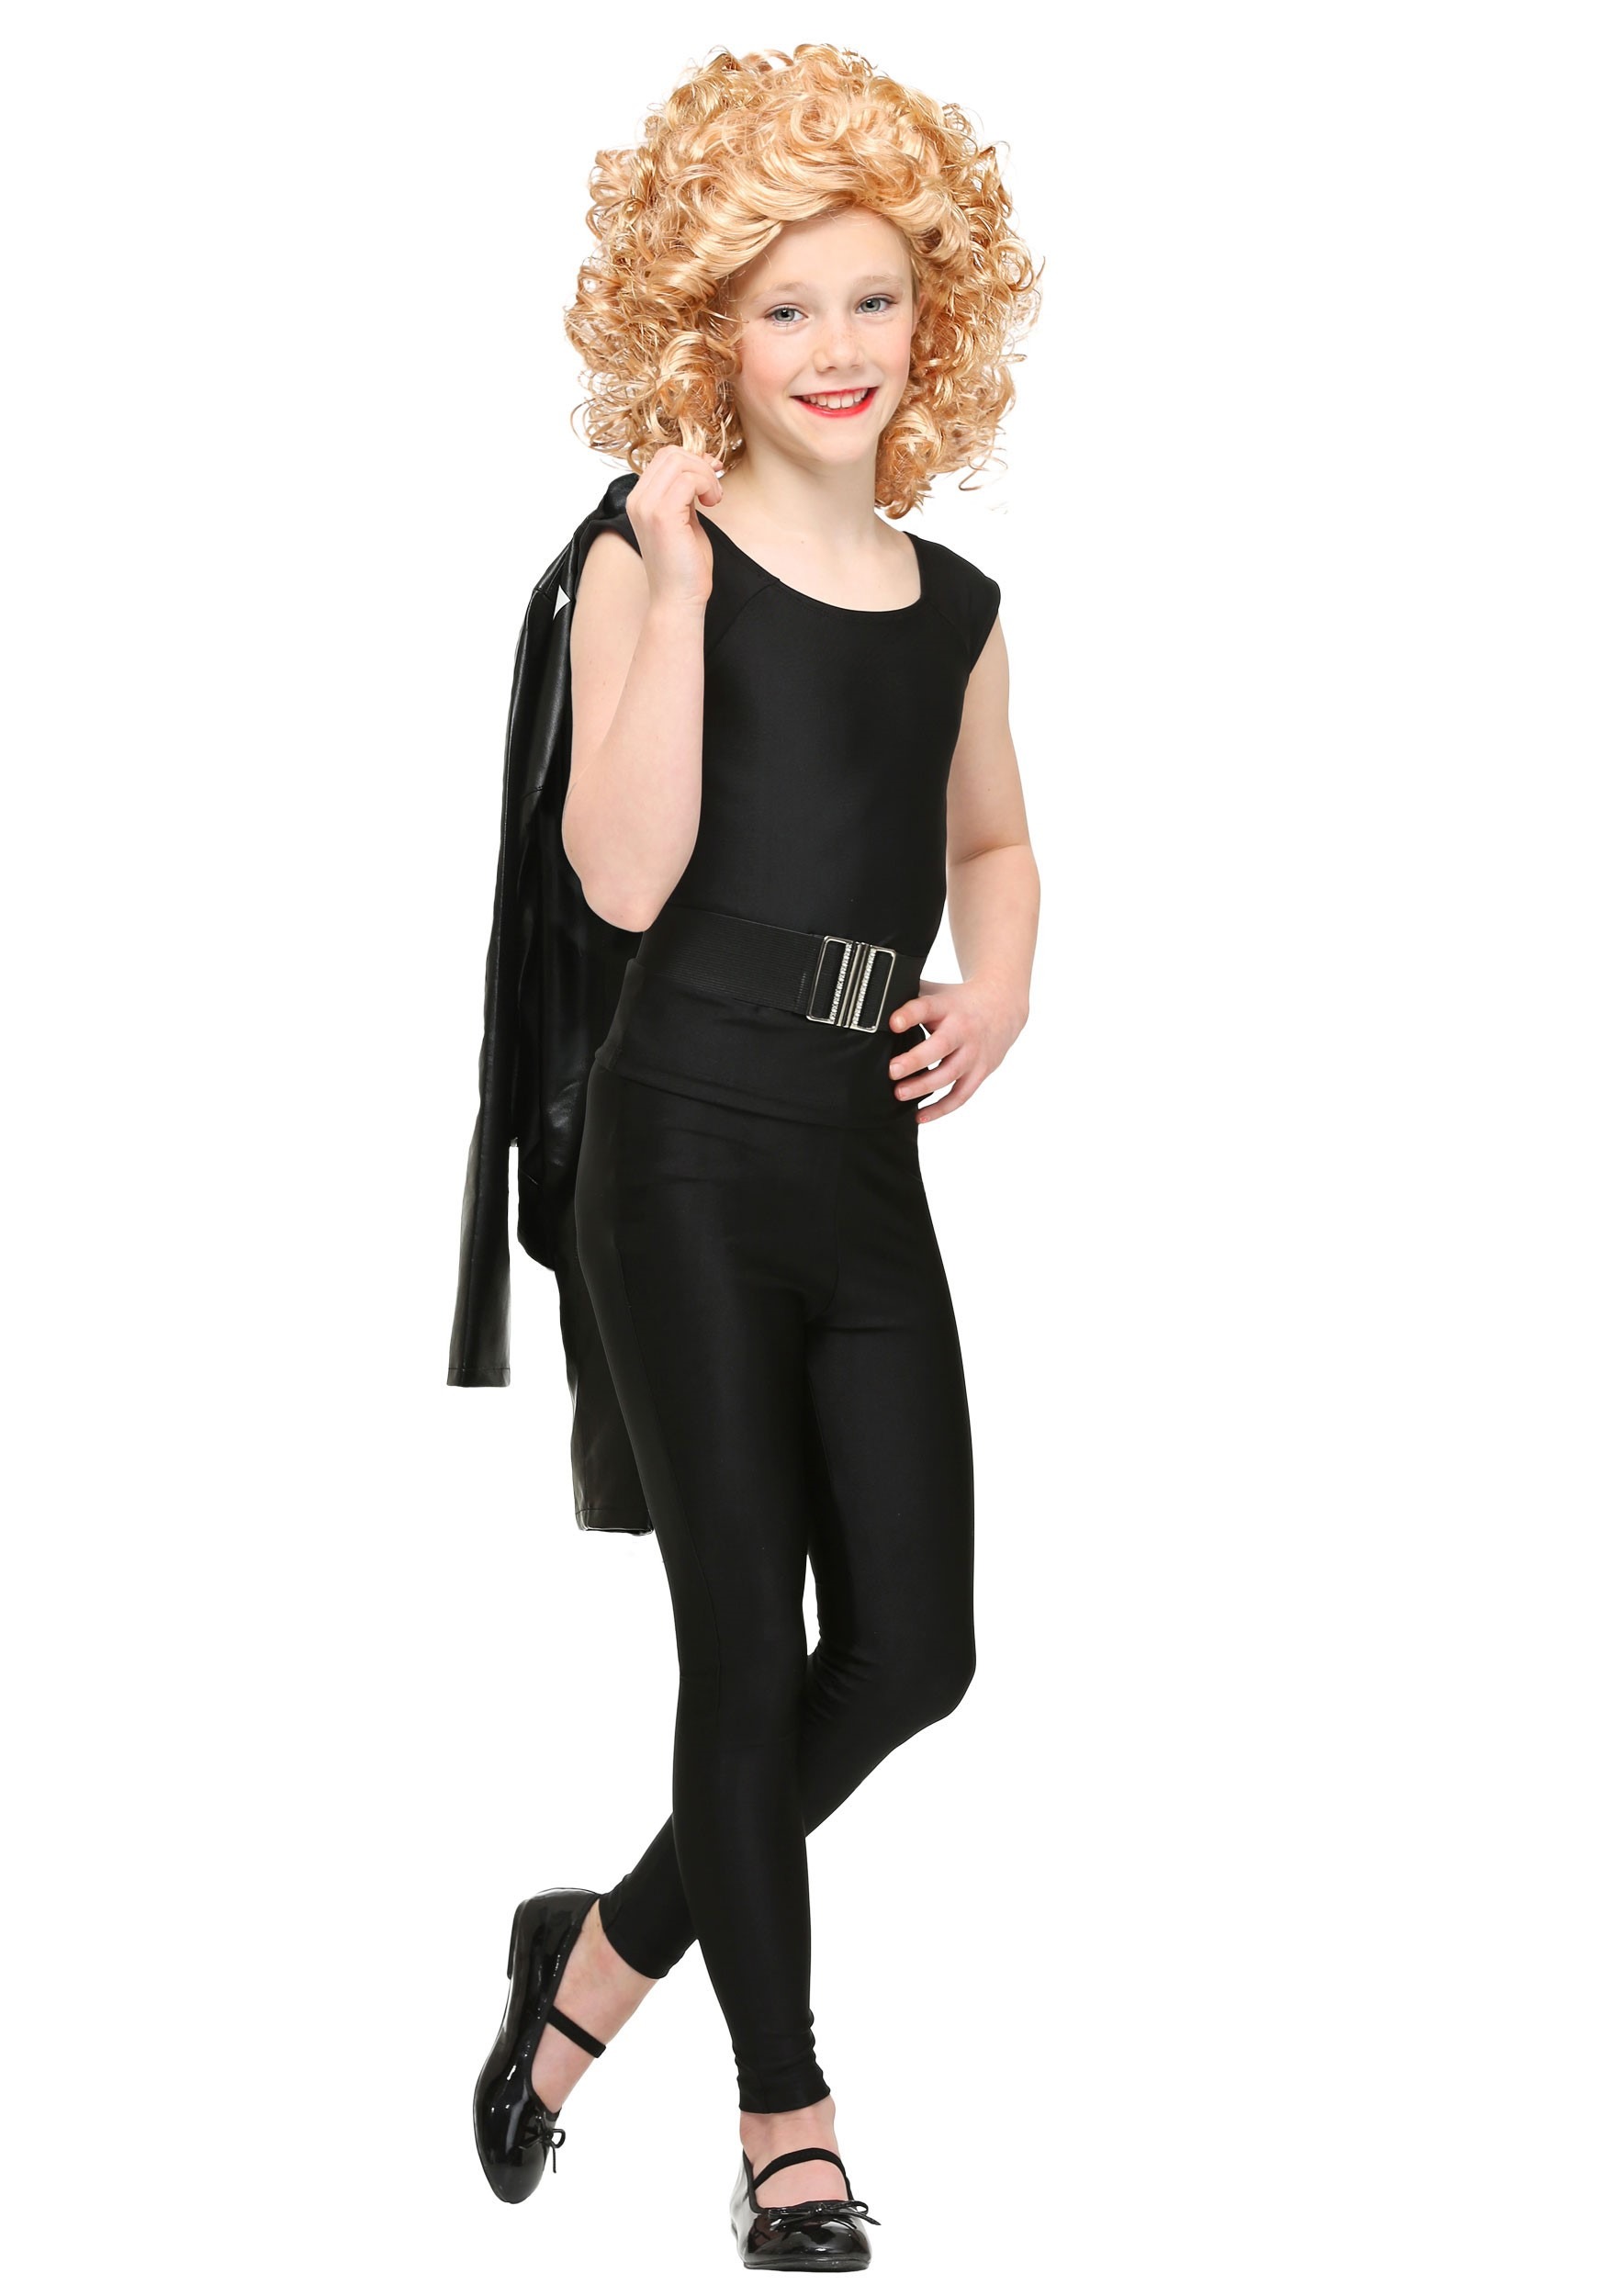 Child Grease Sandy Costume - image 1 of 2